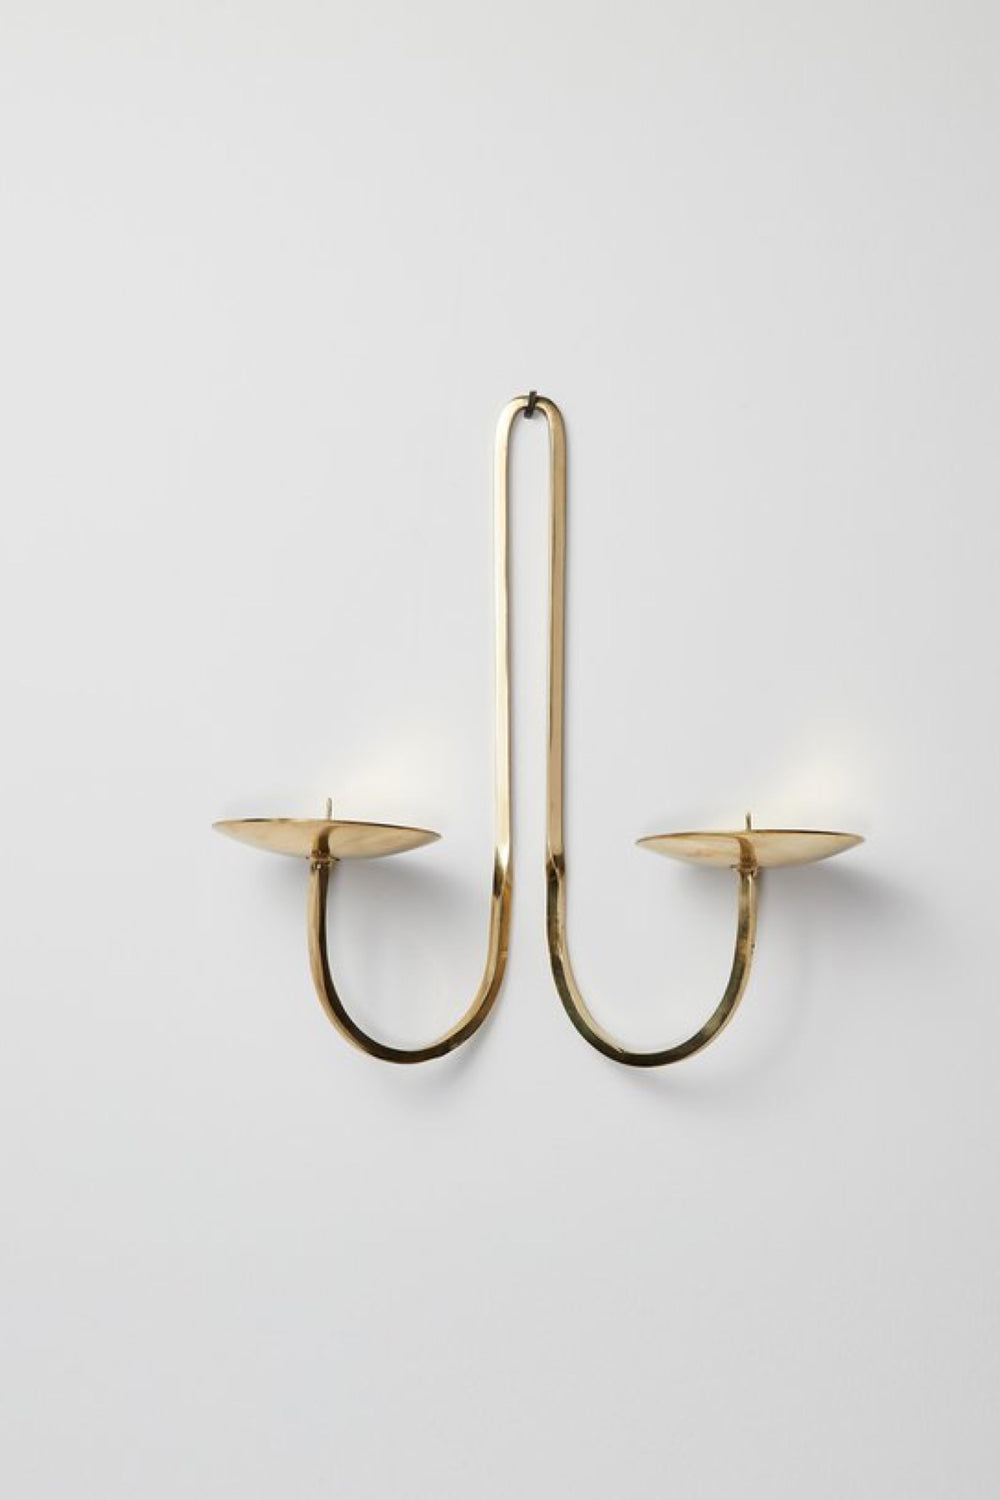 Brass Double Arm Candle Holder